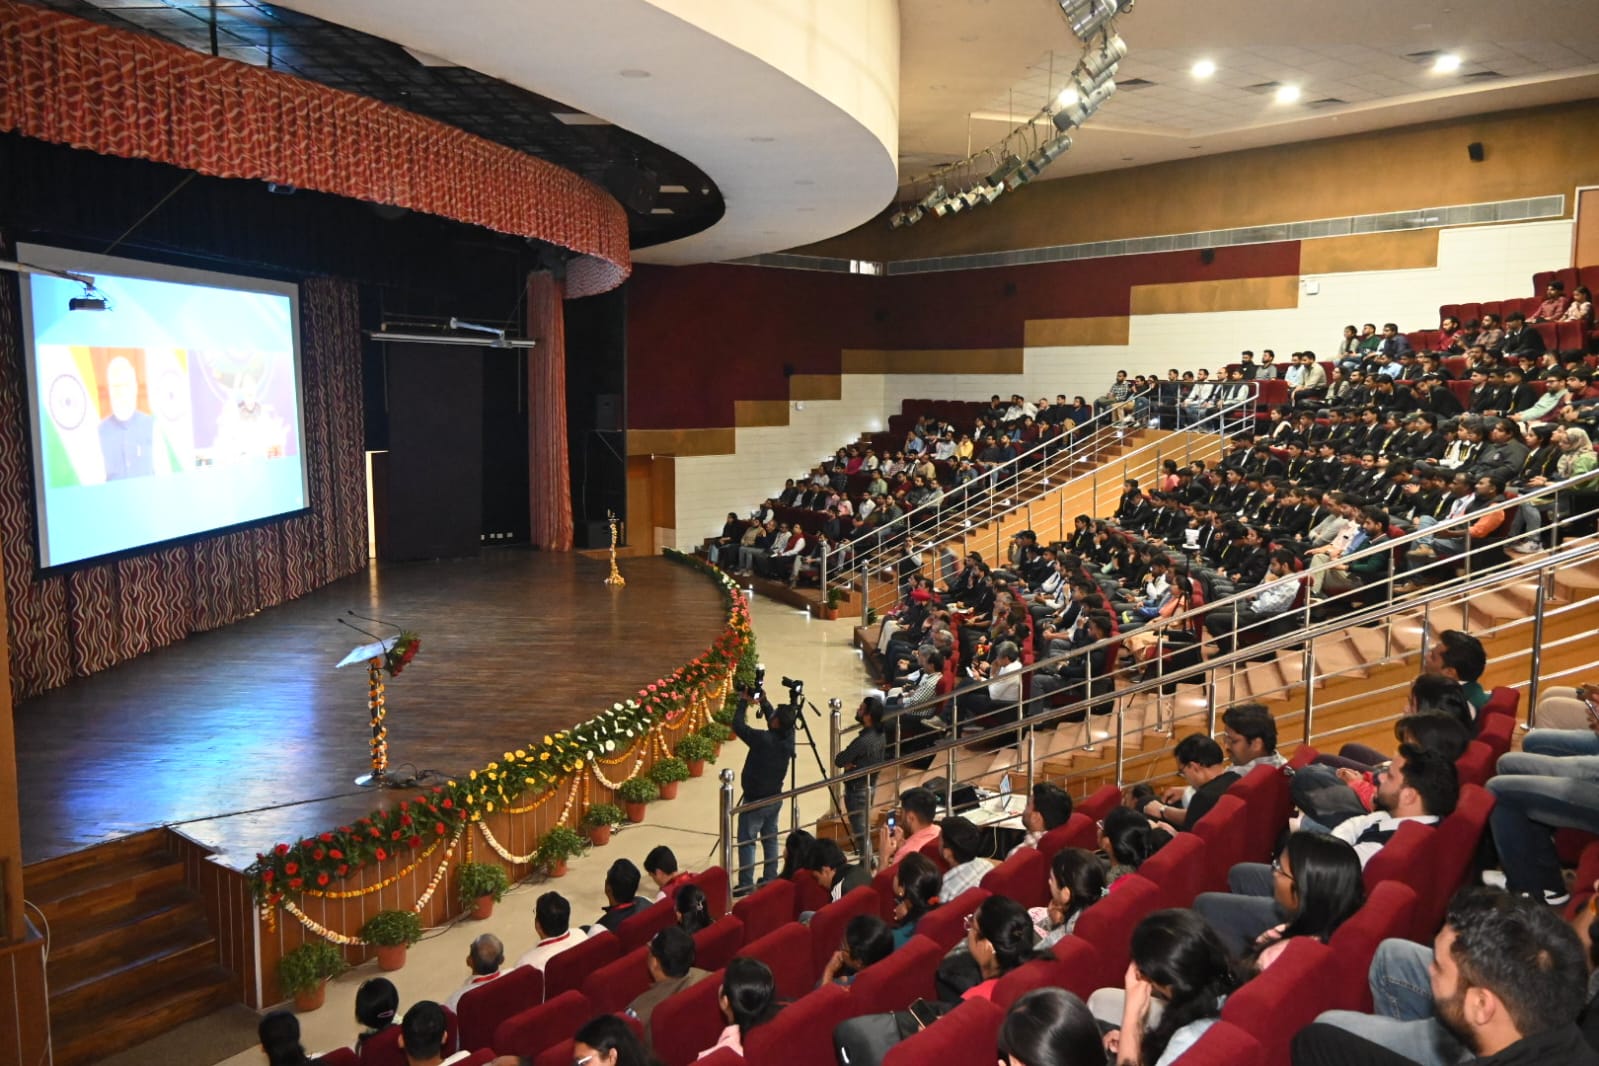  IIT Roorkee Champions India's Technological Revolution with Seminar on India's Techade - Chips for Viksit Bharat